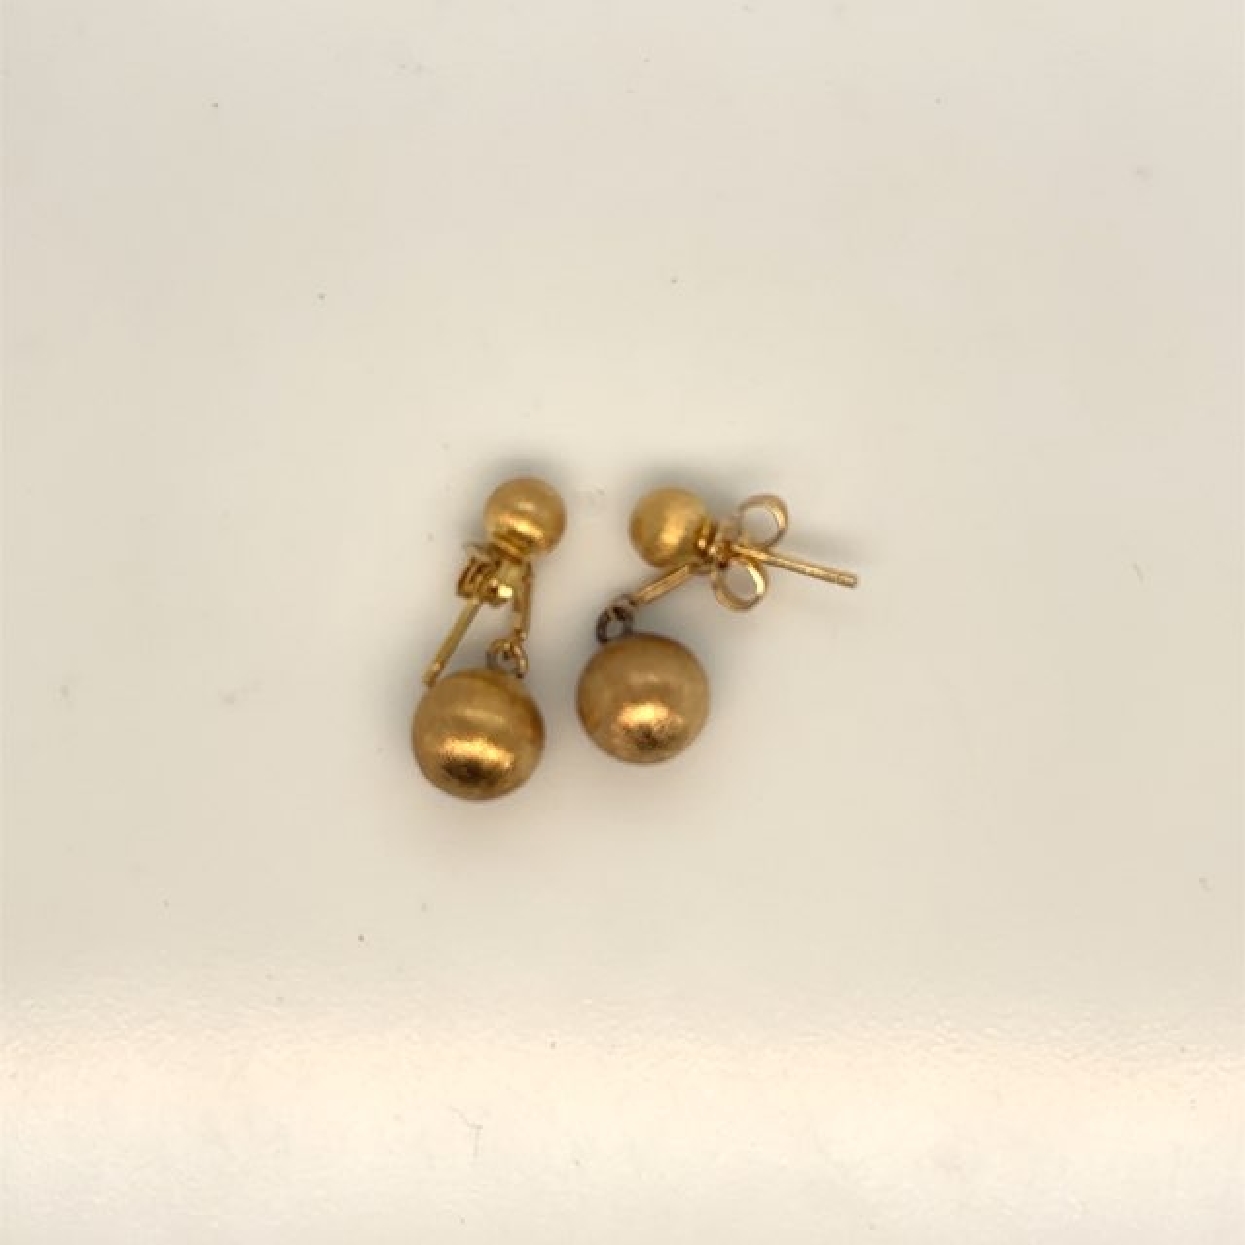 12K Yellow Gold Filled Stud Drop Earrings with Textured Balls
